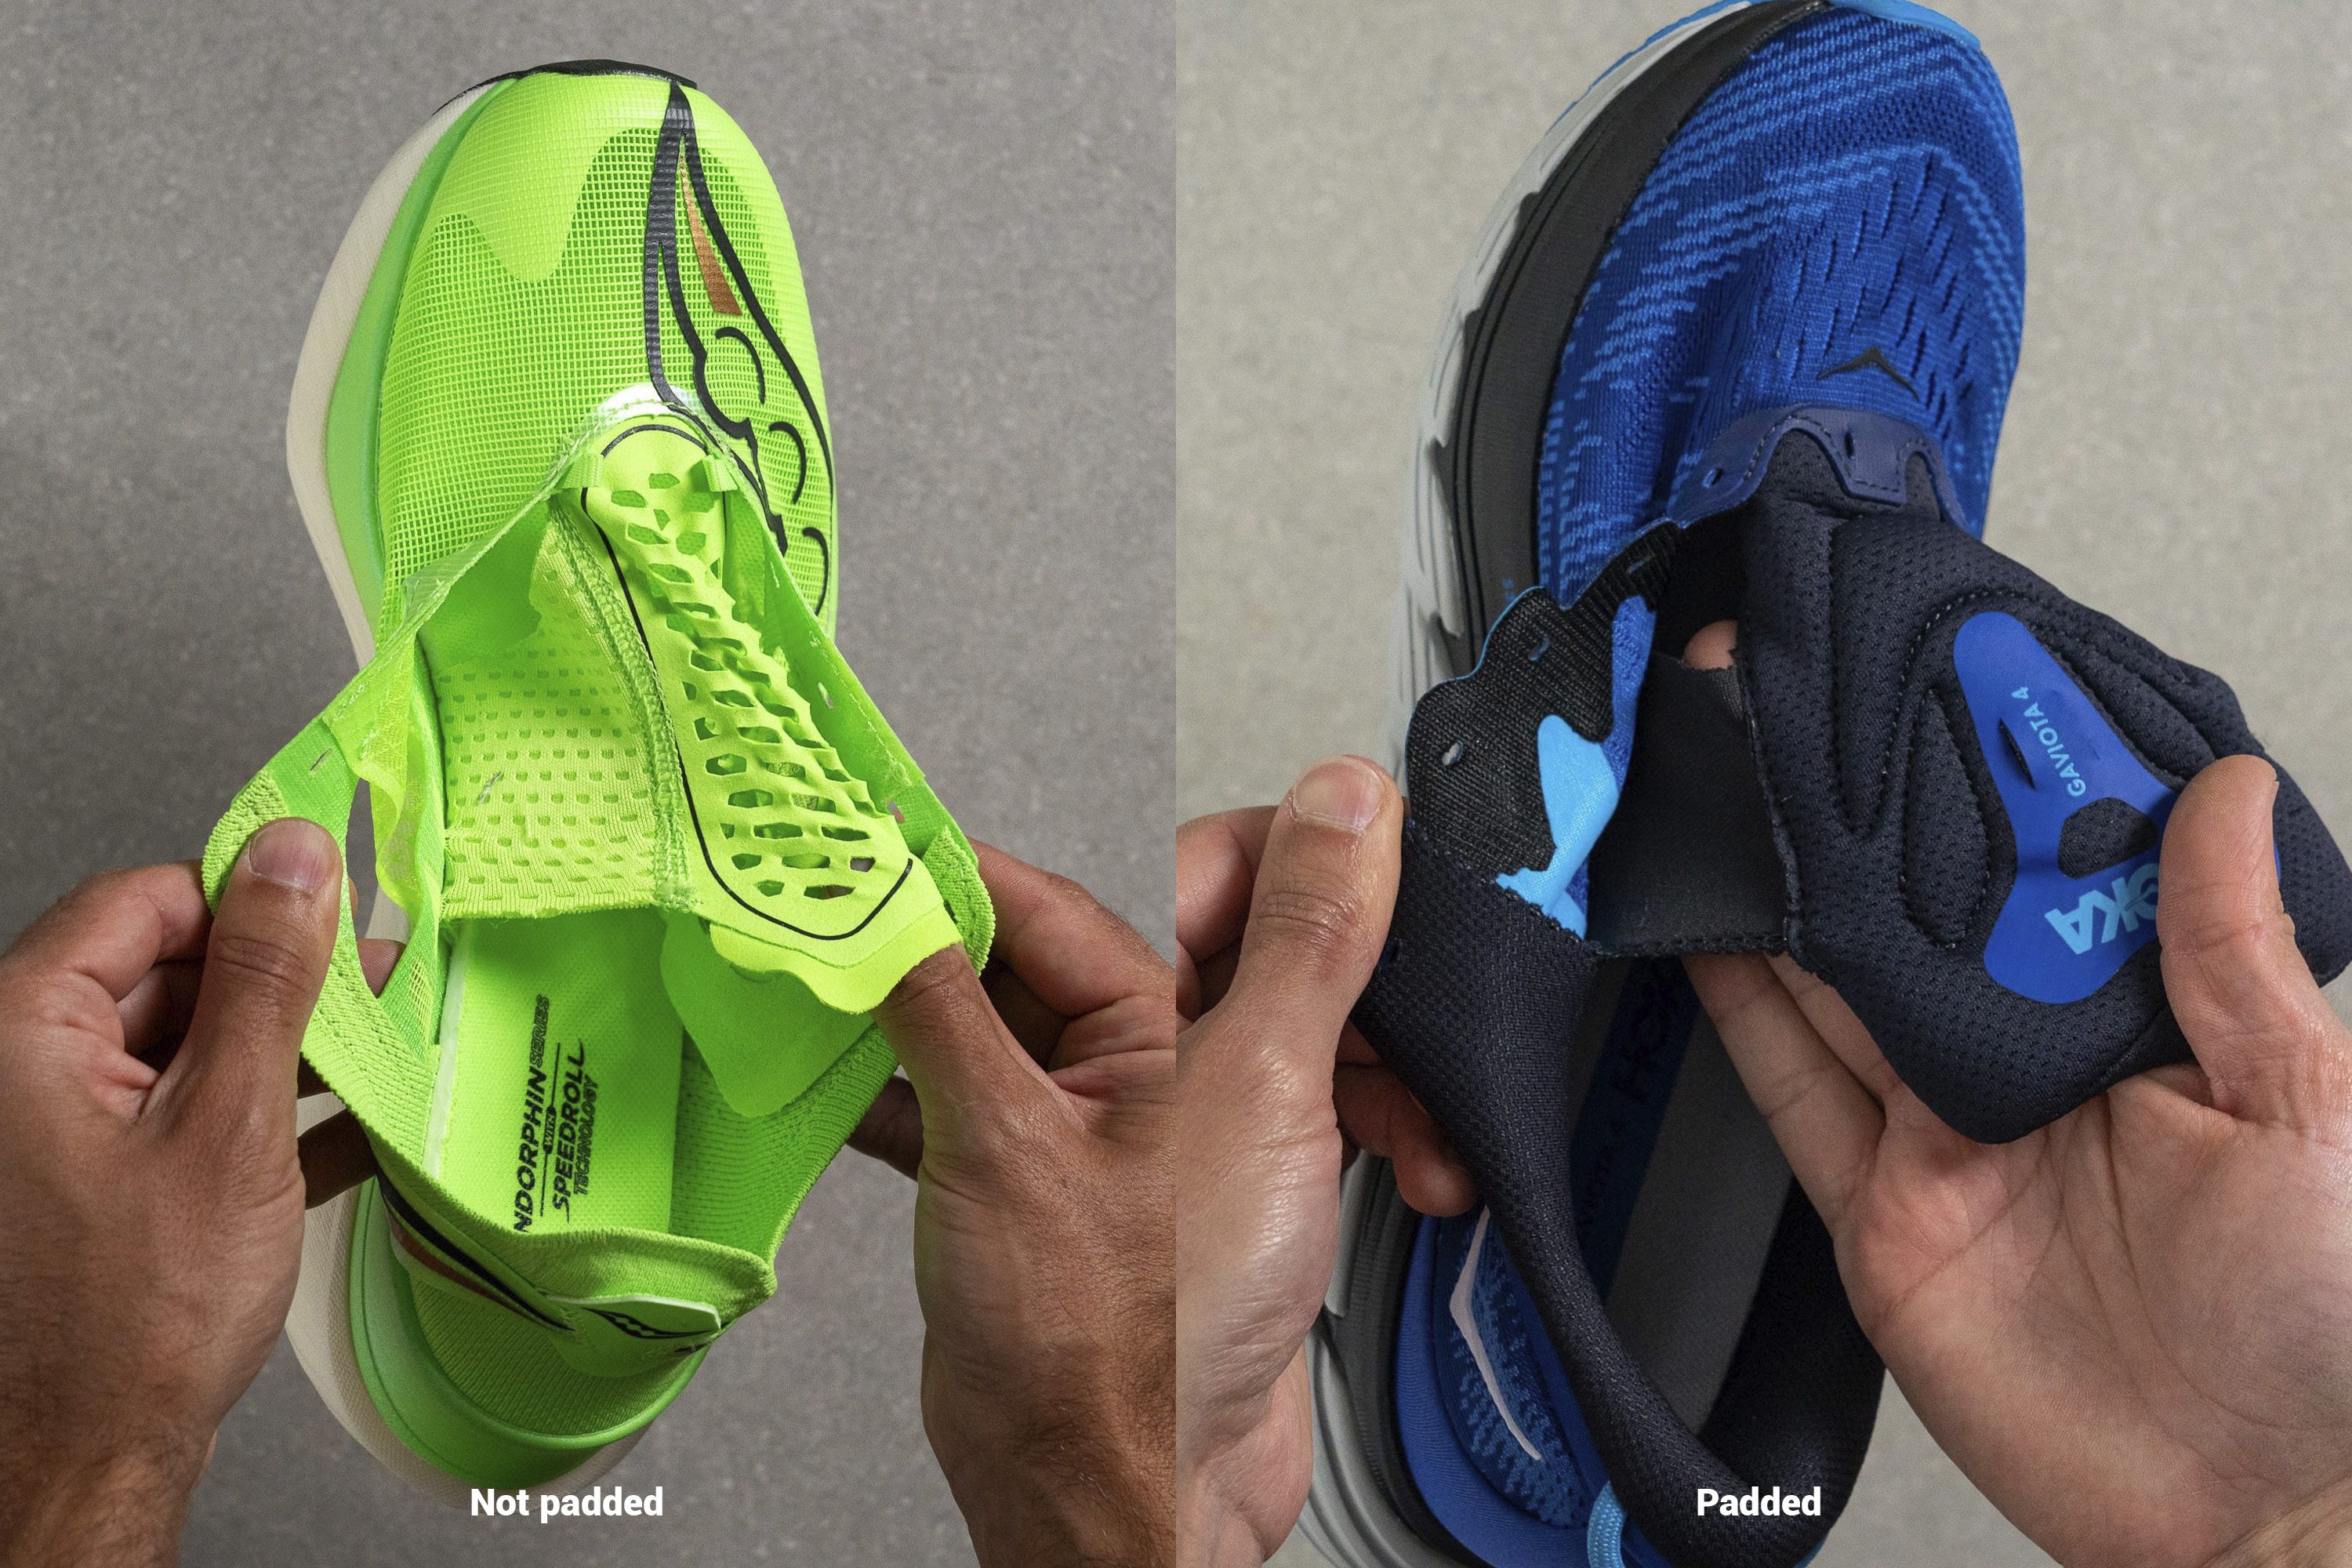 Guide: Soft vs. Firm Running Shoes